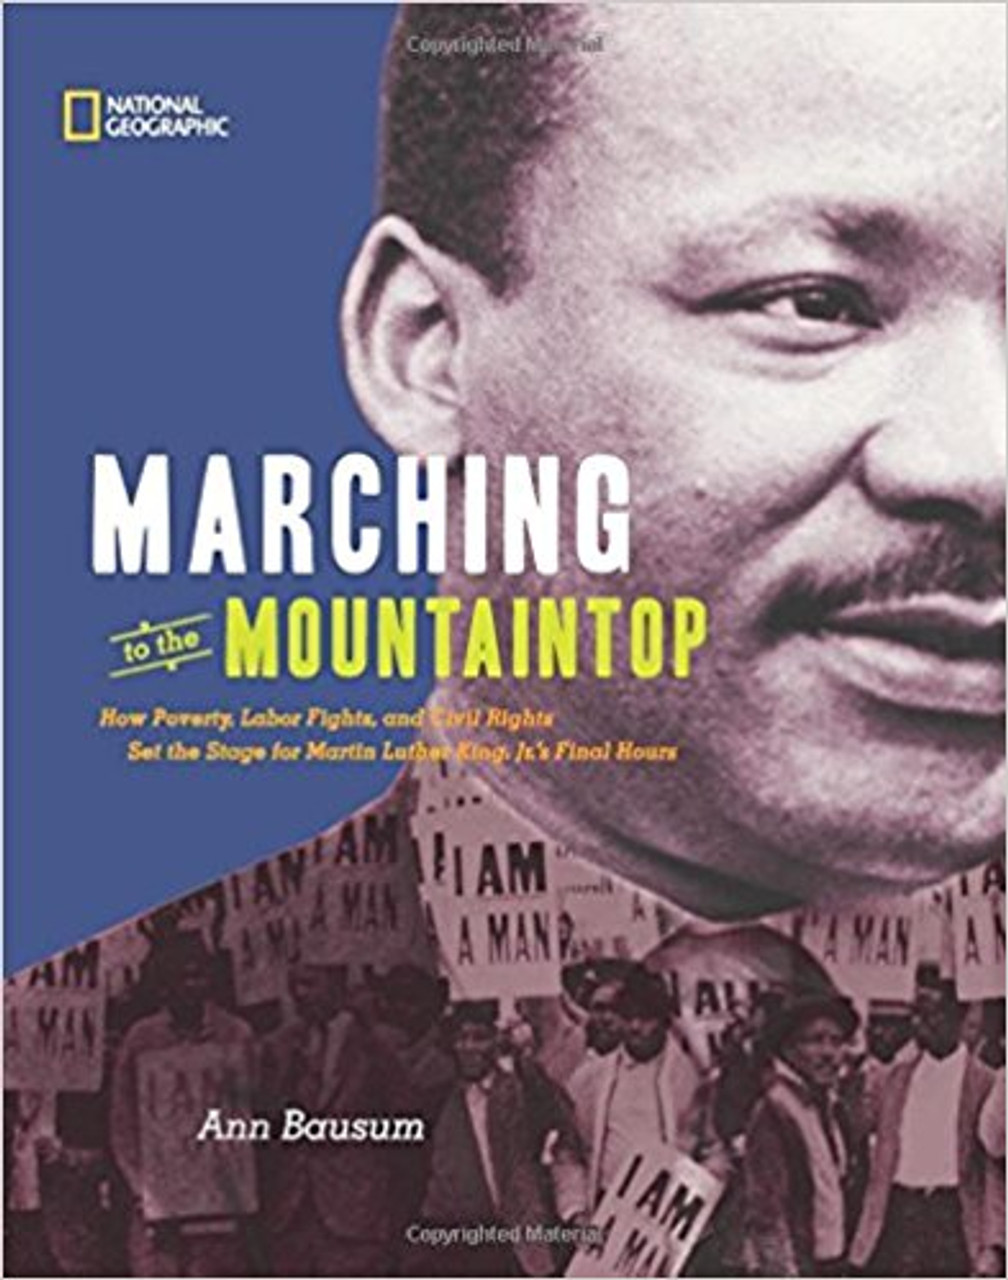 Marching to the Mountain top: How Poverty, Labor Fights, and Civil Rights Set the Stage for Martin Luther King Jr.'s Final Hour by Ann Bausum